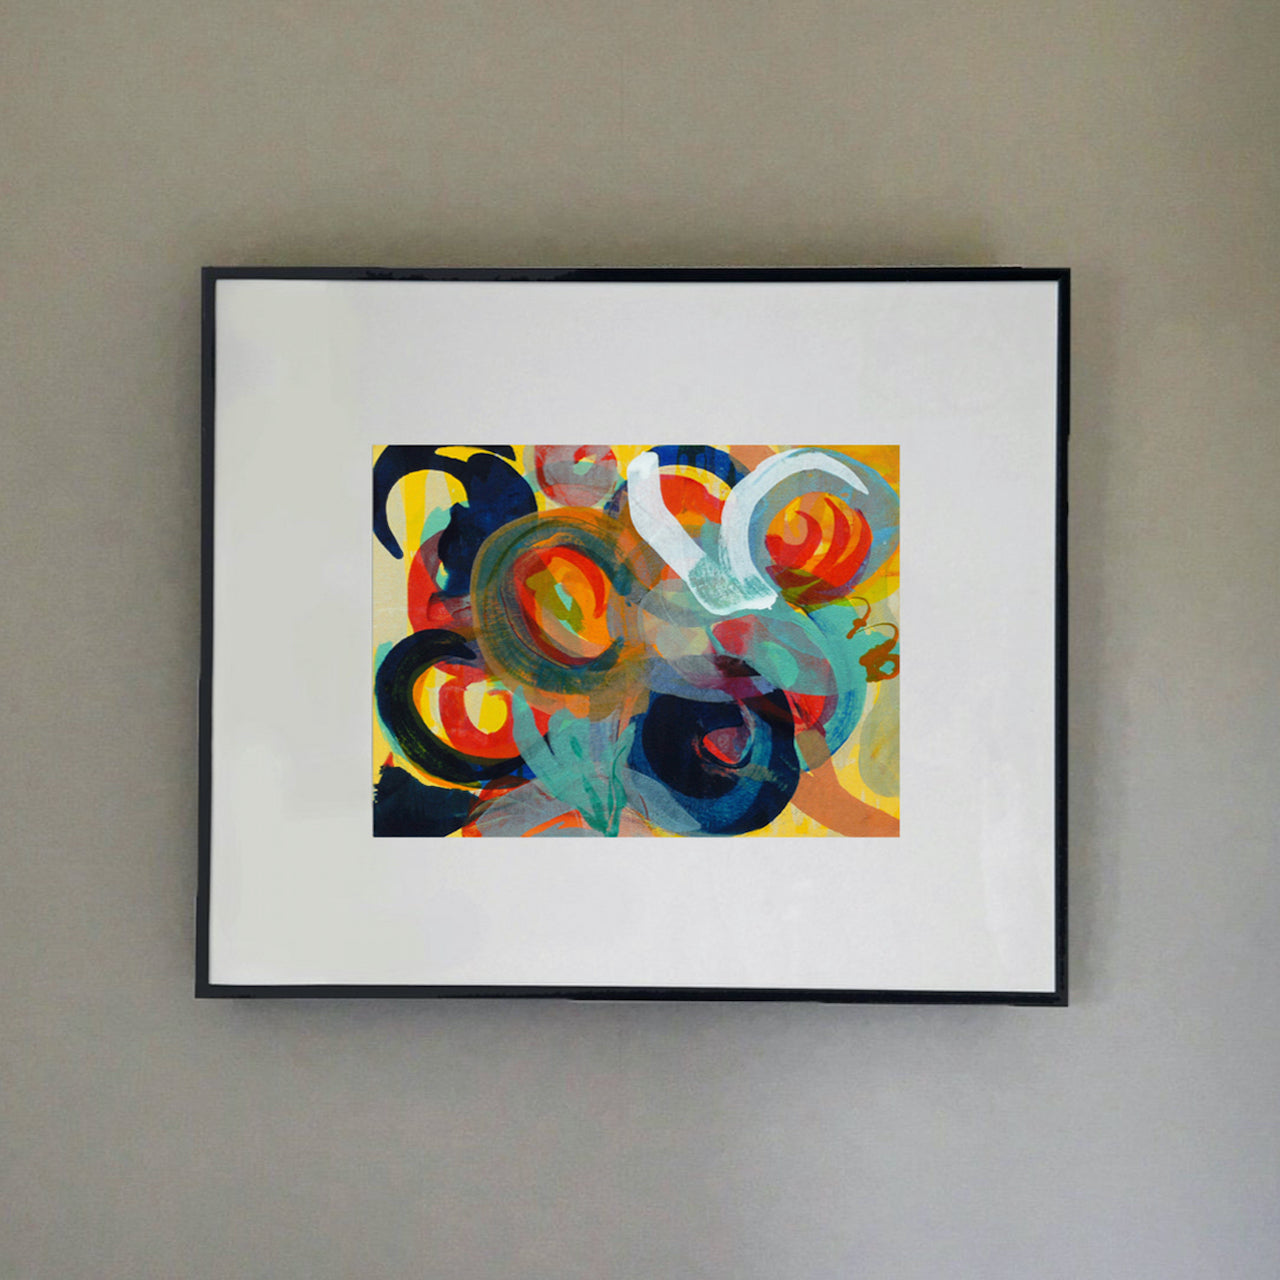 Abstract piece with coloured circles in black, green, oranges and yellows by artist Ella Carty